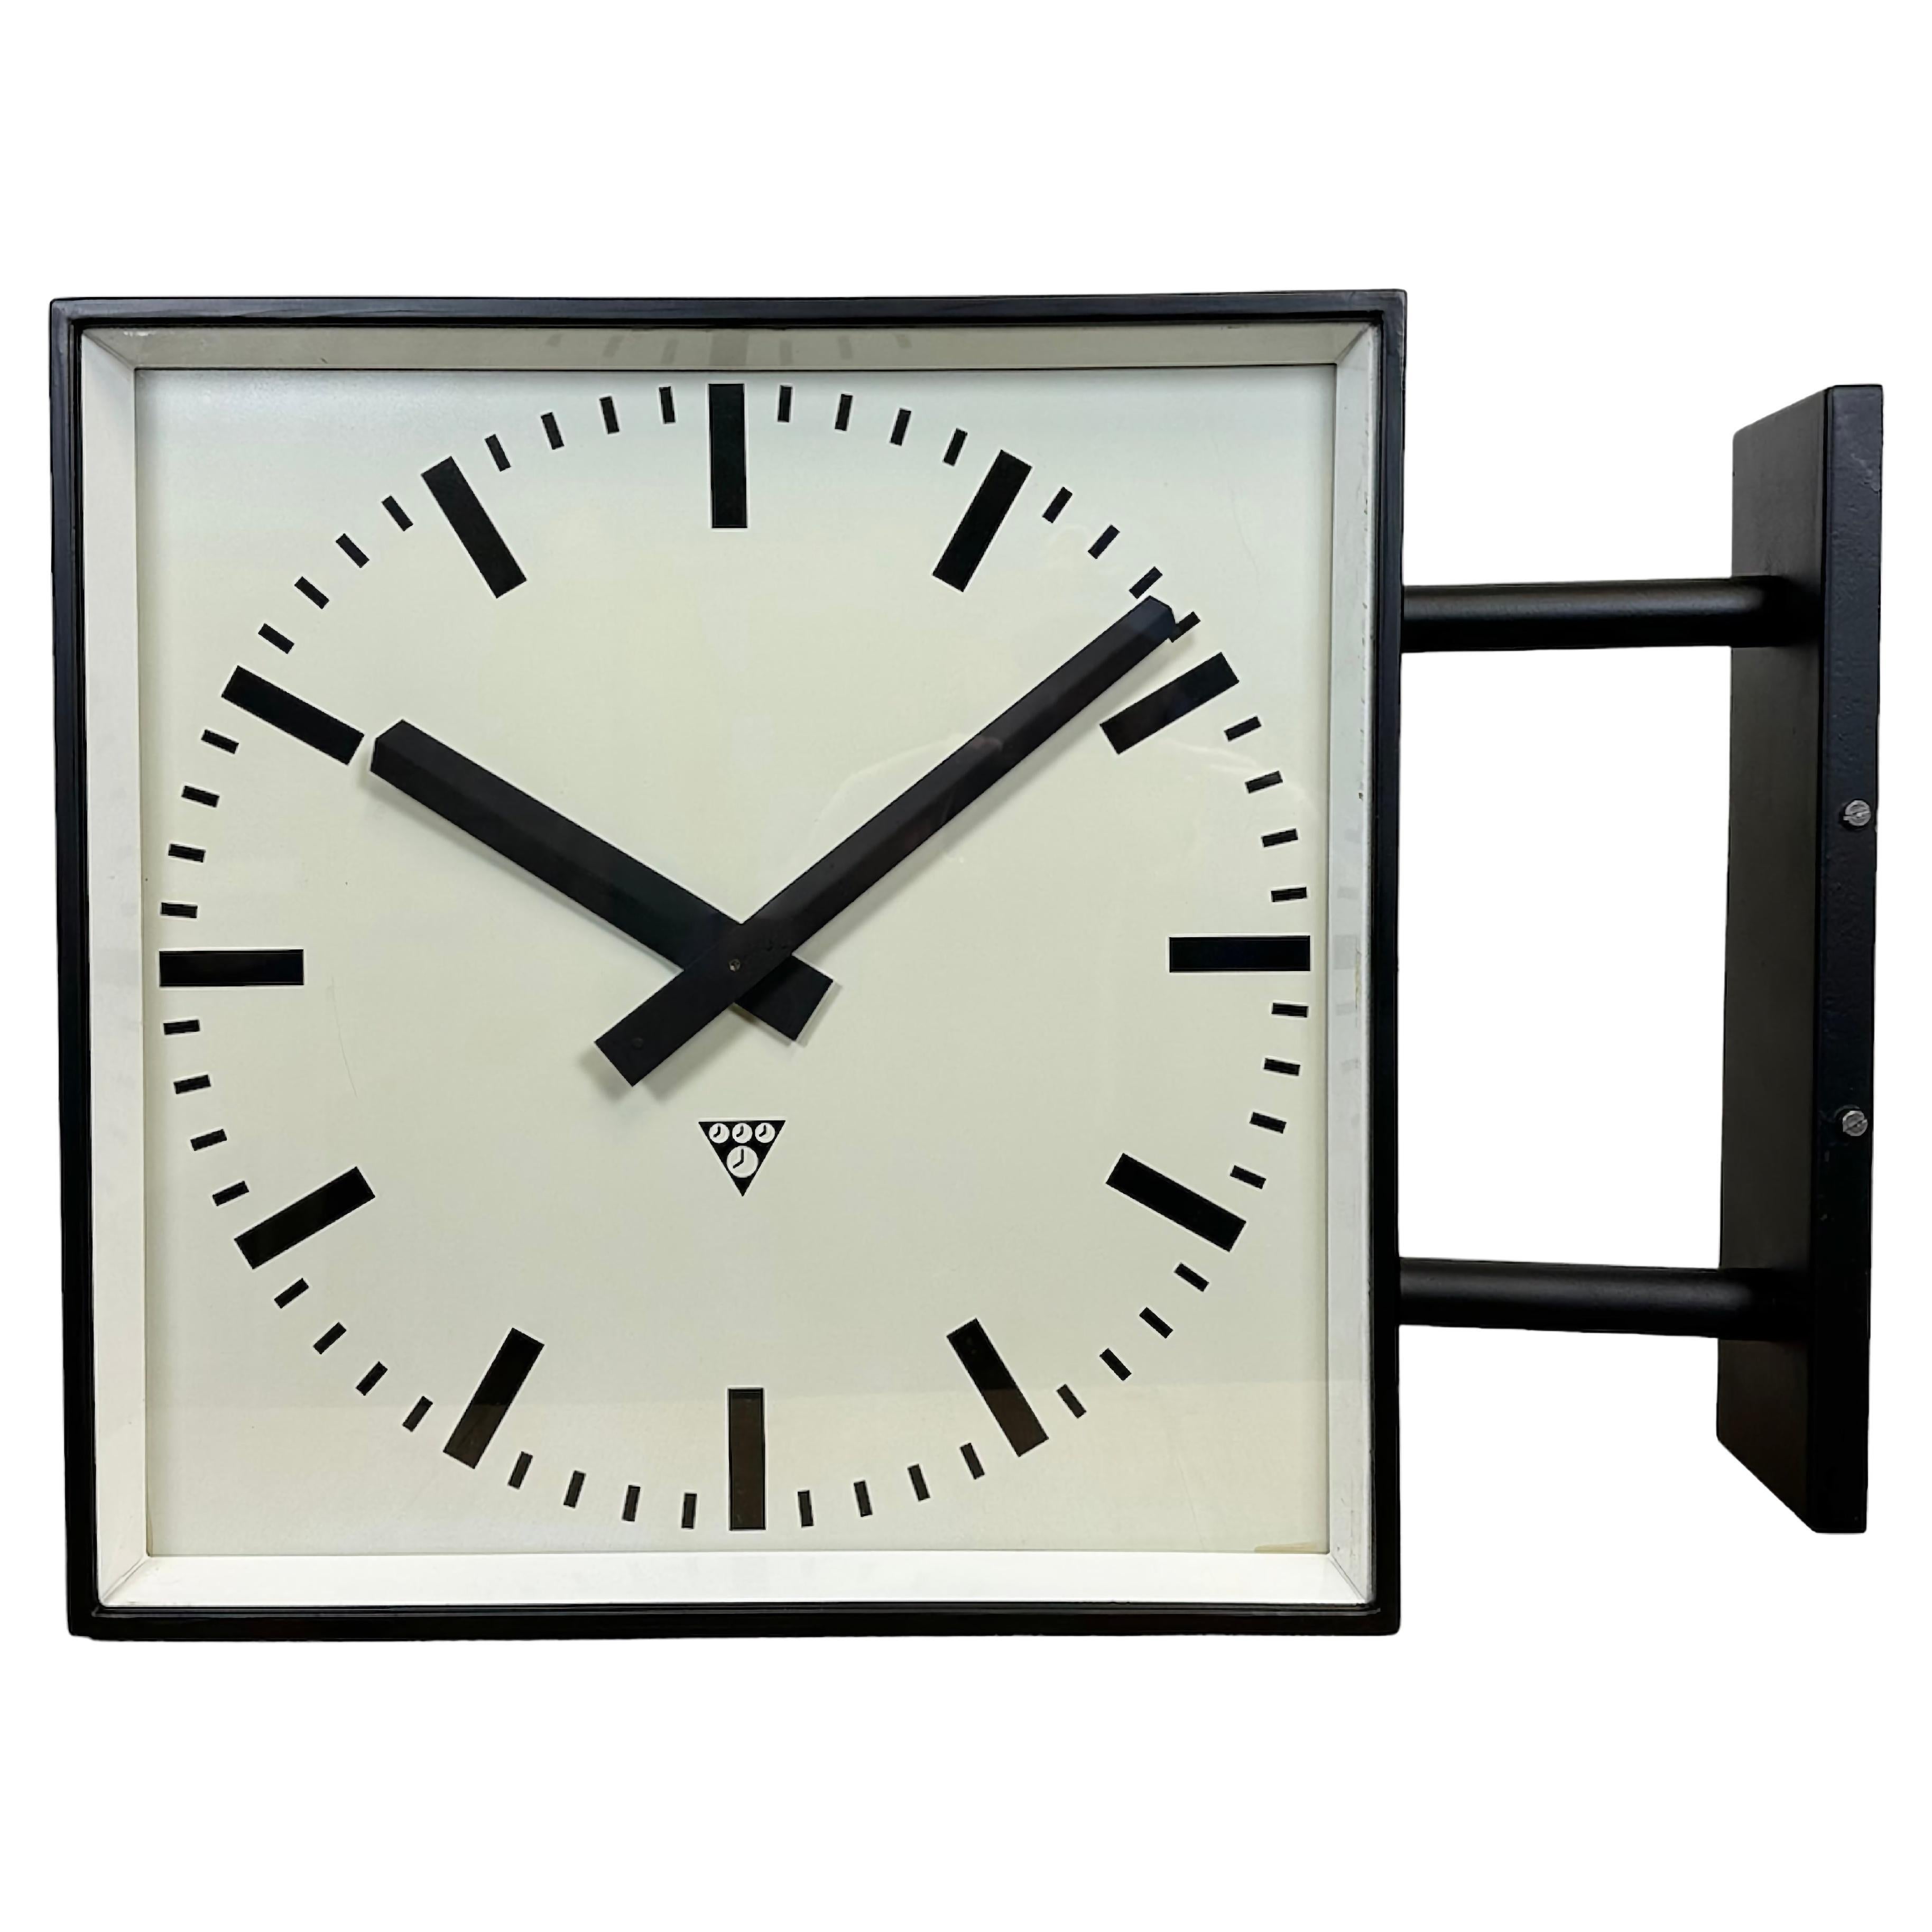 Large Square Industrial Double-Sided Factory Wall Clock from Pragotron, 1970s